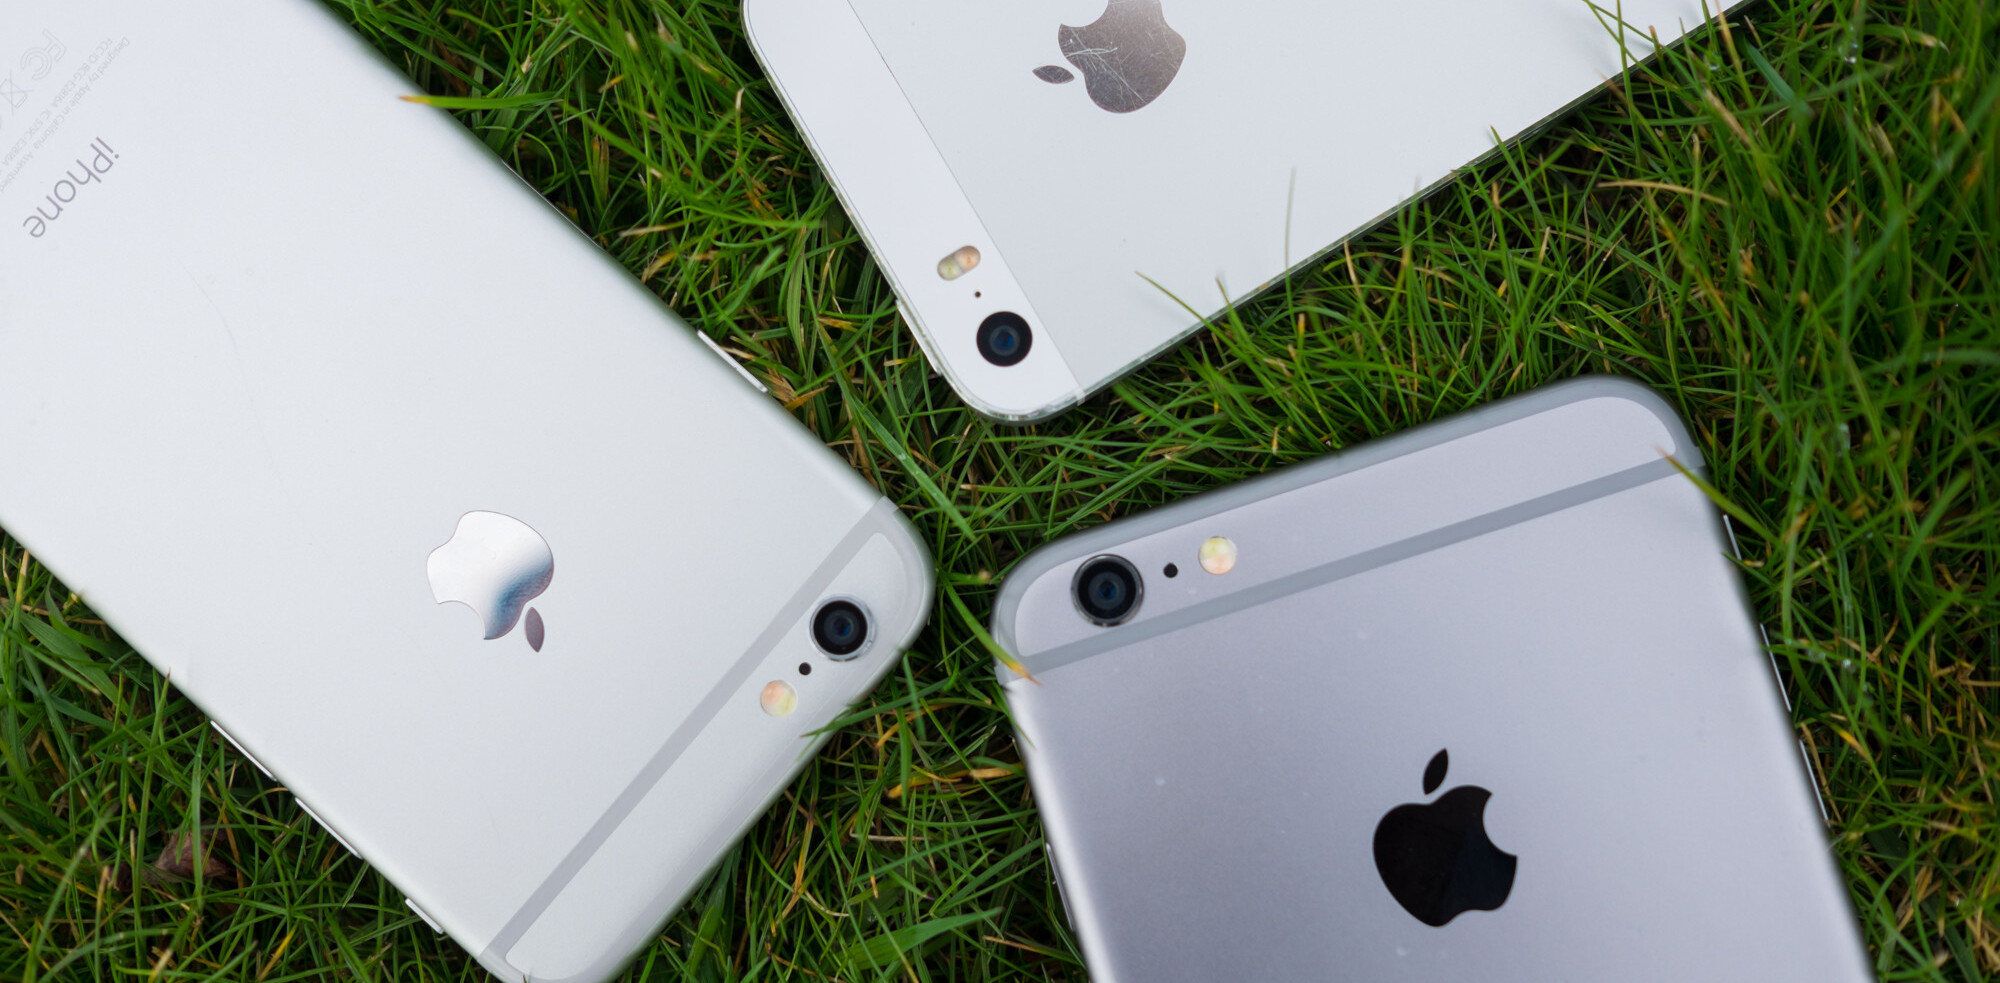 New rumor says the iPhone 7 may be the iPhone 6s you always wanted